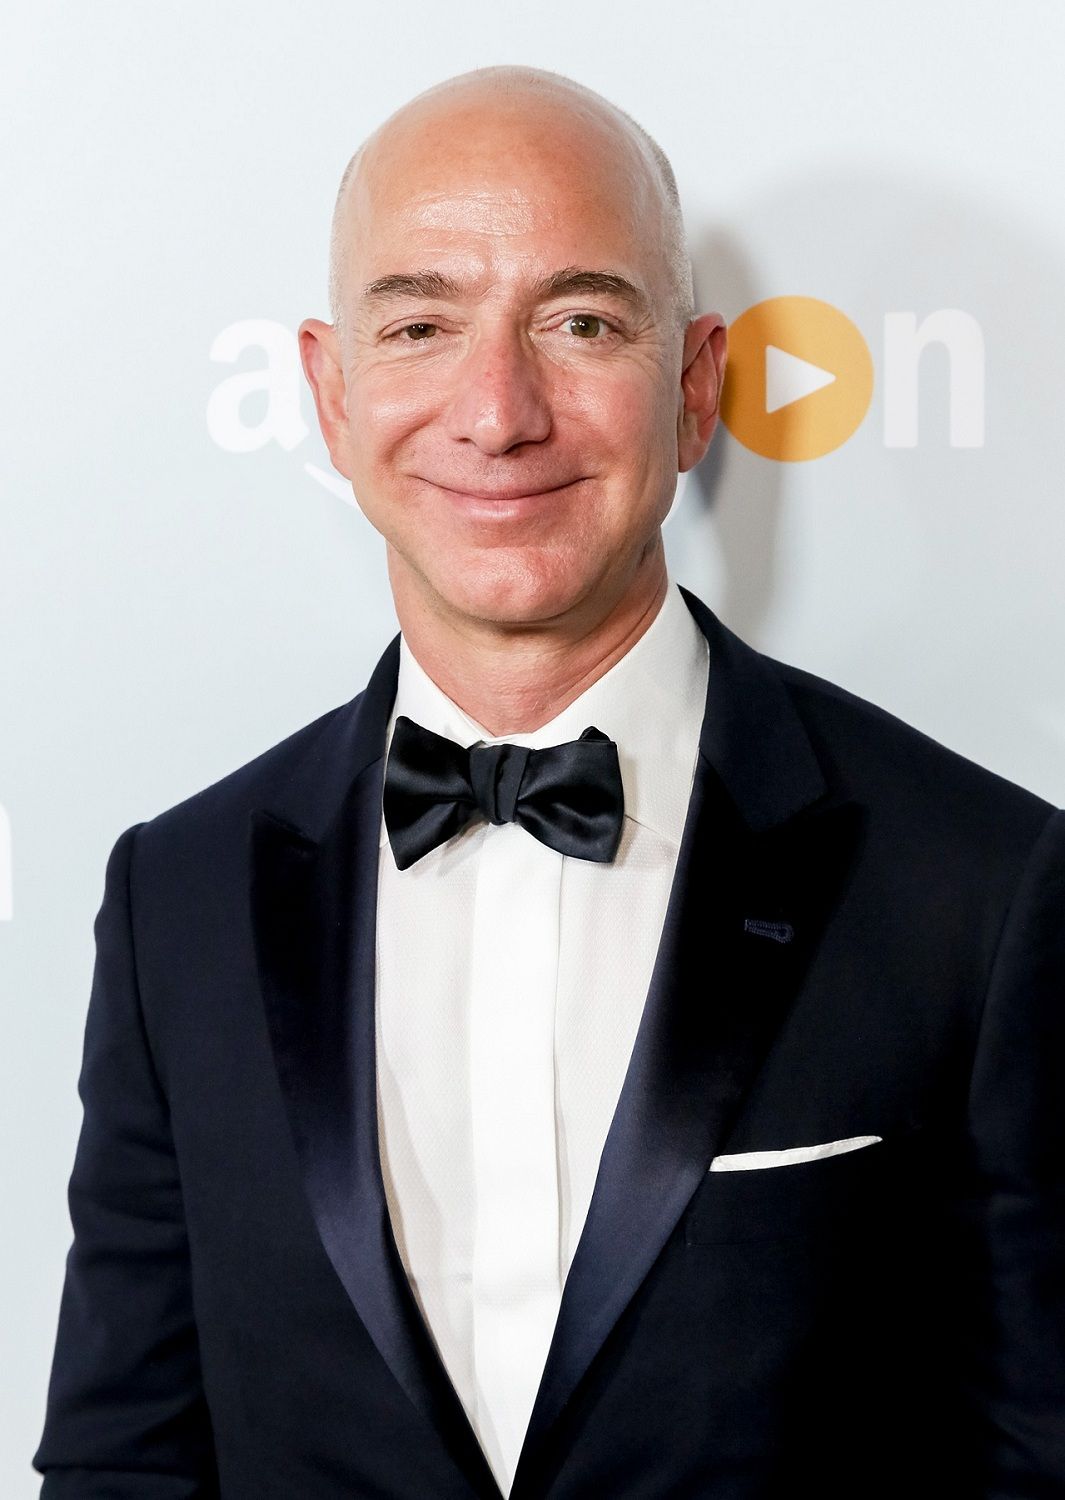 Jeff Bezos Net Worth, Age, Wife & Full HD Picture